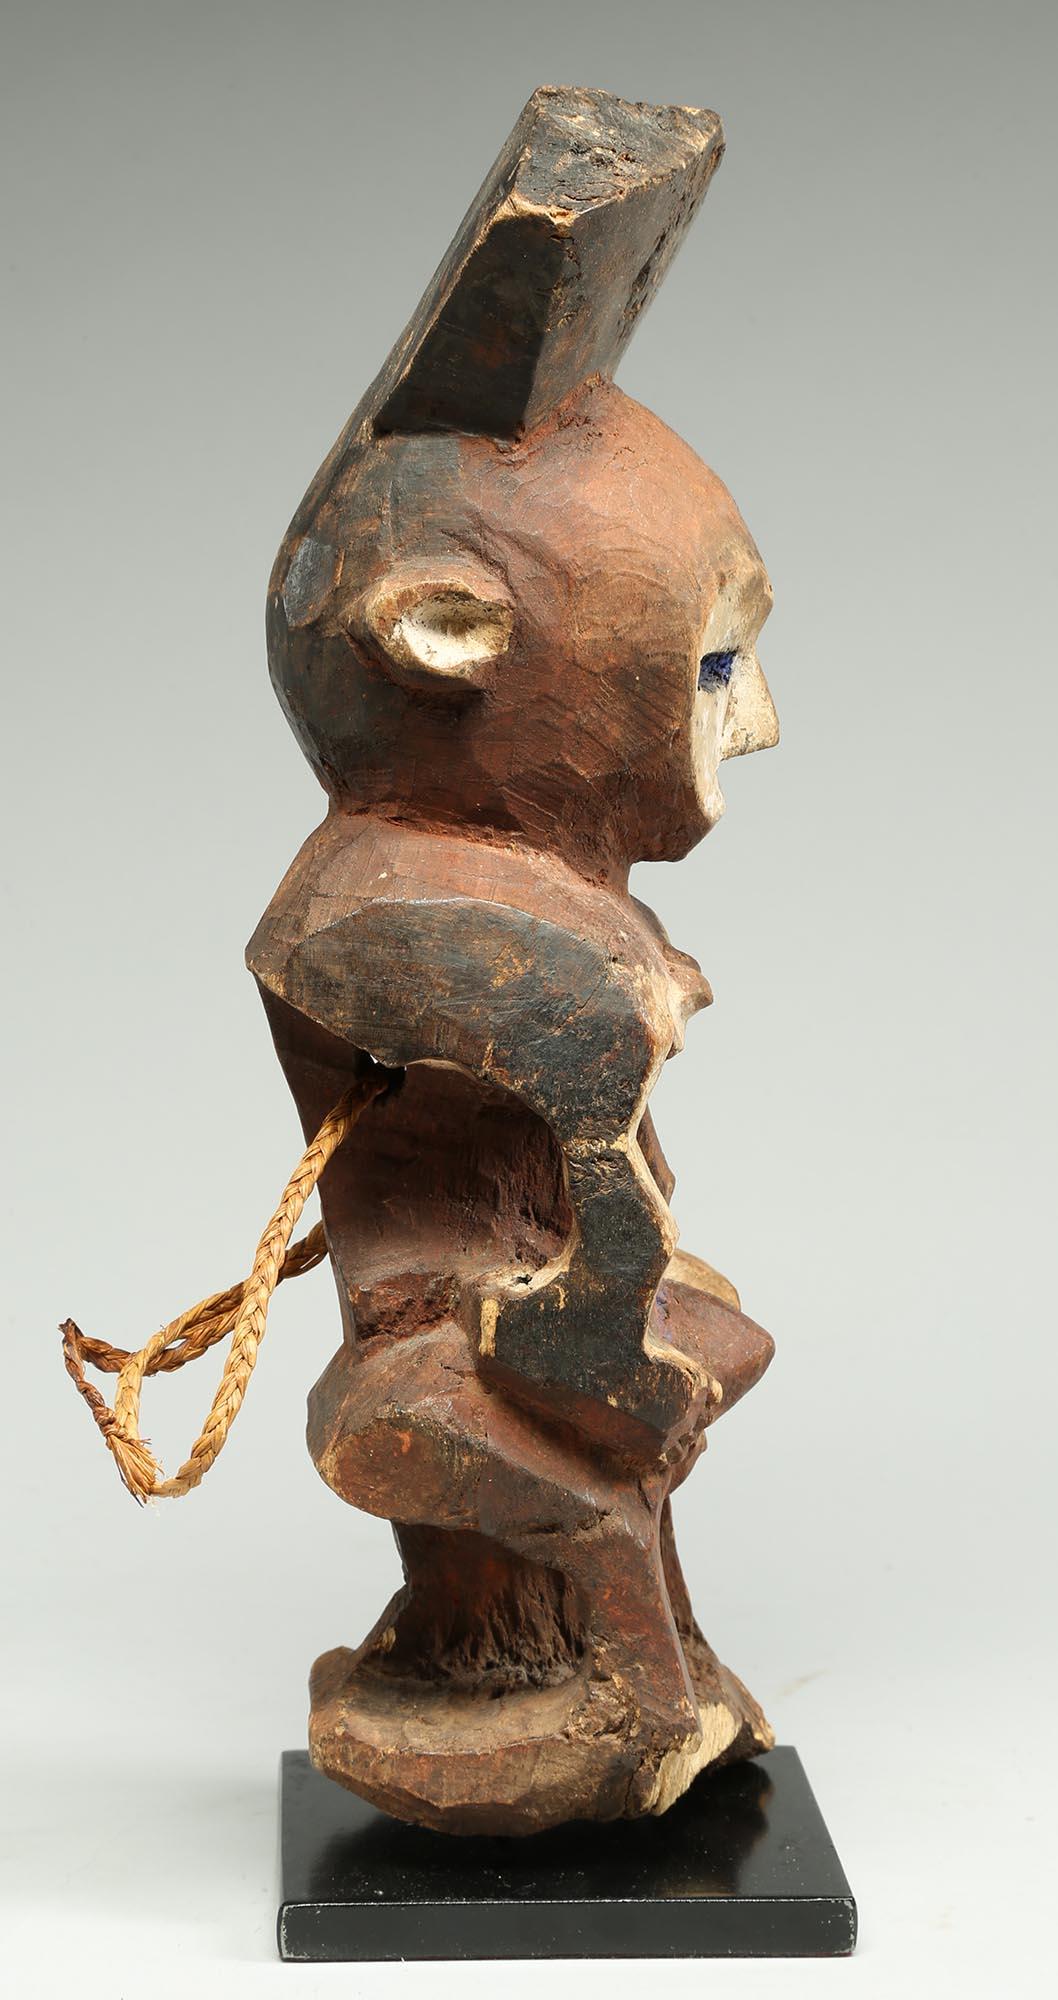 Hand-Carved Geometric Painted Standing Mbole Figure, DRC, Early 20th Century Cubist Form